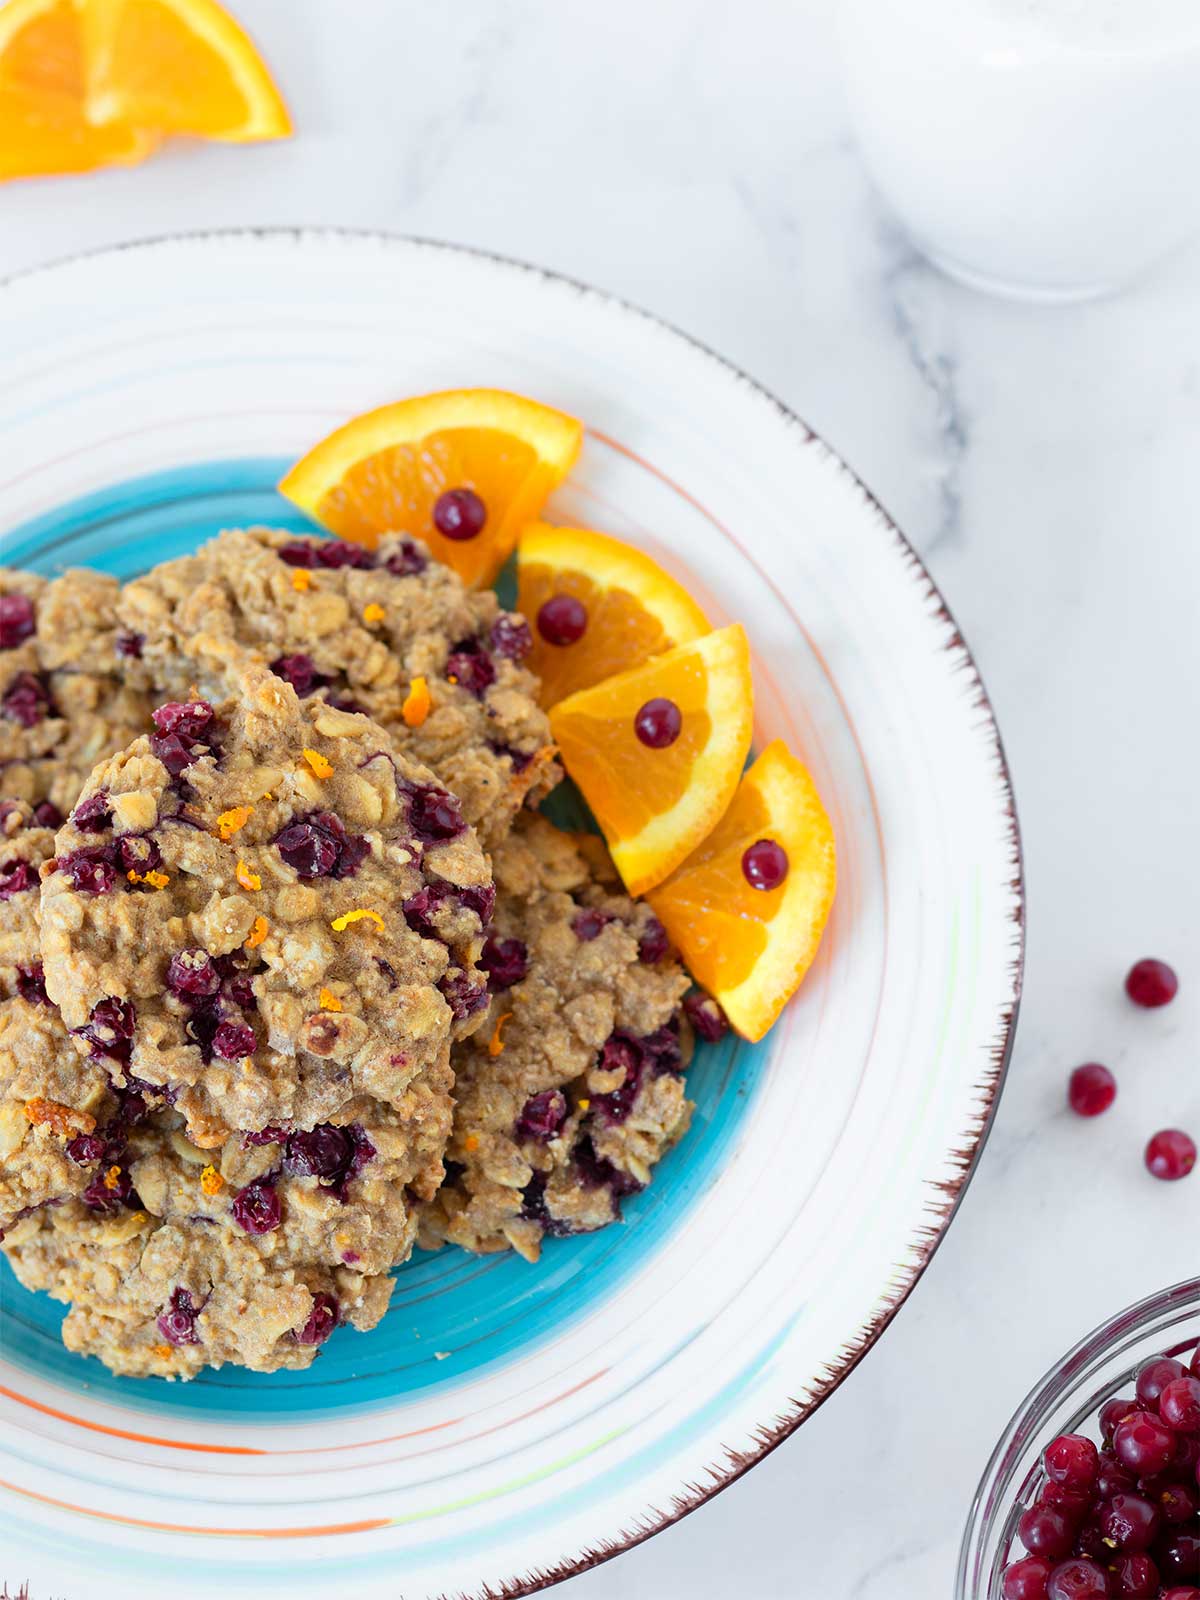 Chewy cranberry oatmeal cookies in a plate with sliced fresh orange and wild cranberries with a glass of dairy-free milk